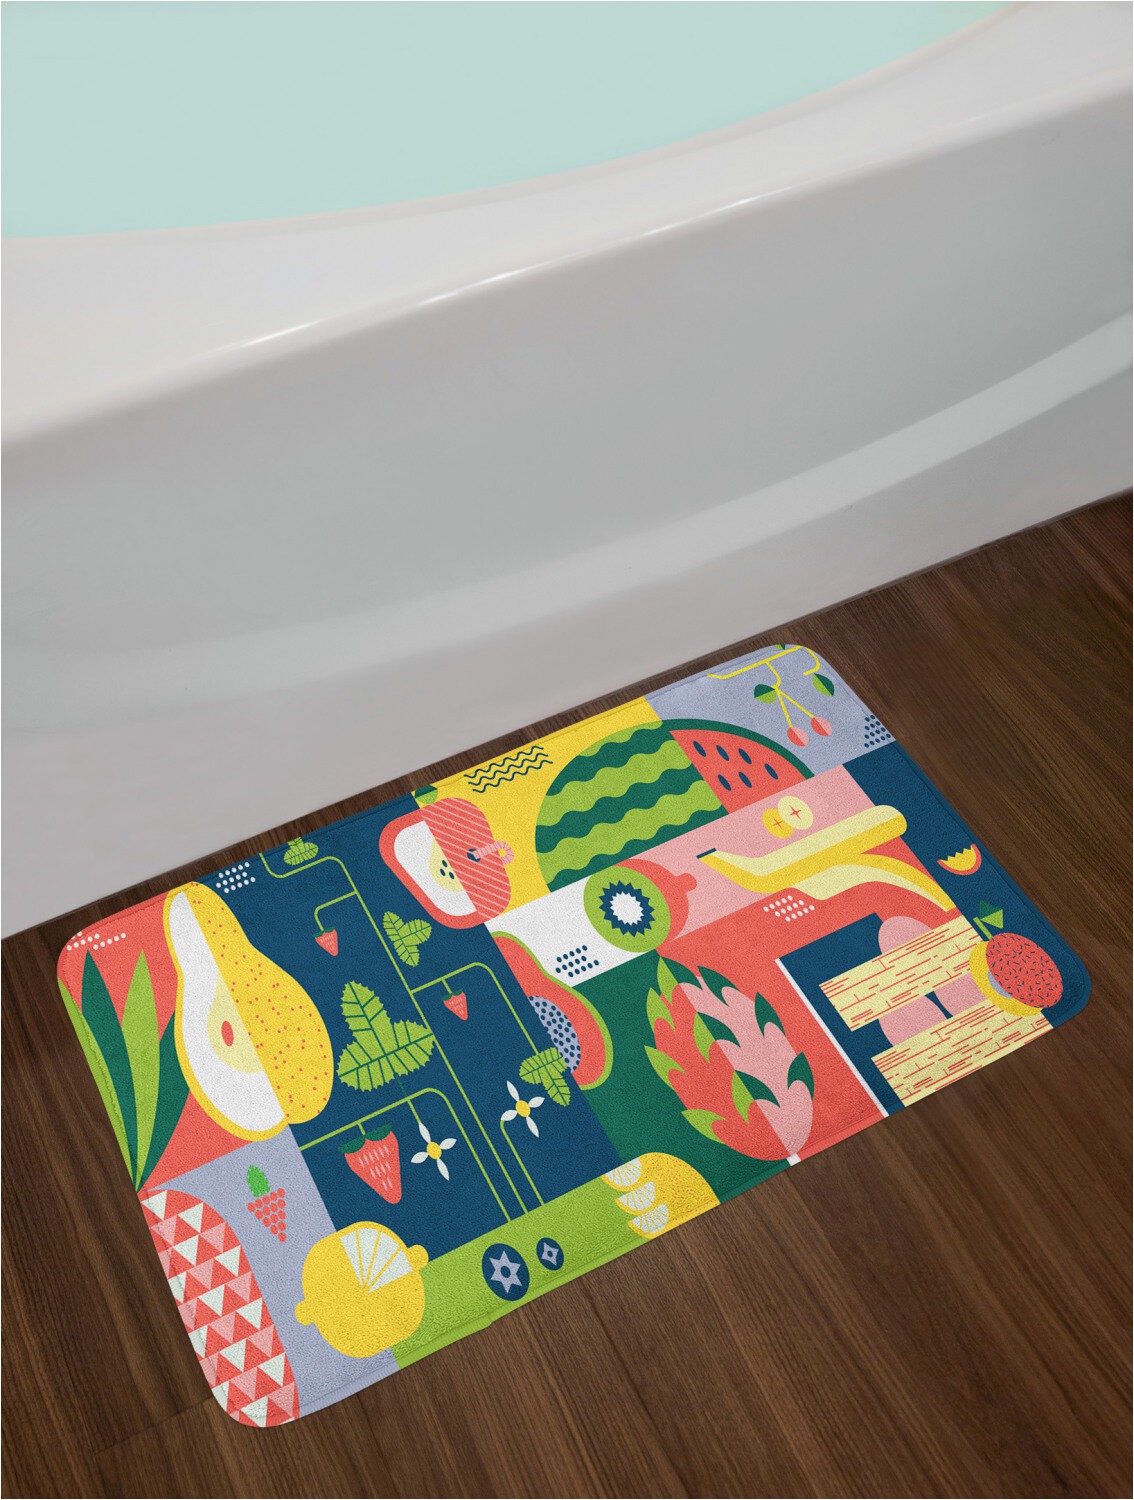 Wayfair Bathroom Rugs and towels Modernistic Nature with Food Elements Bath Rug